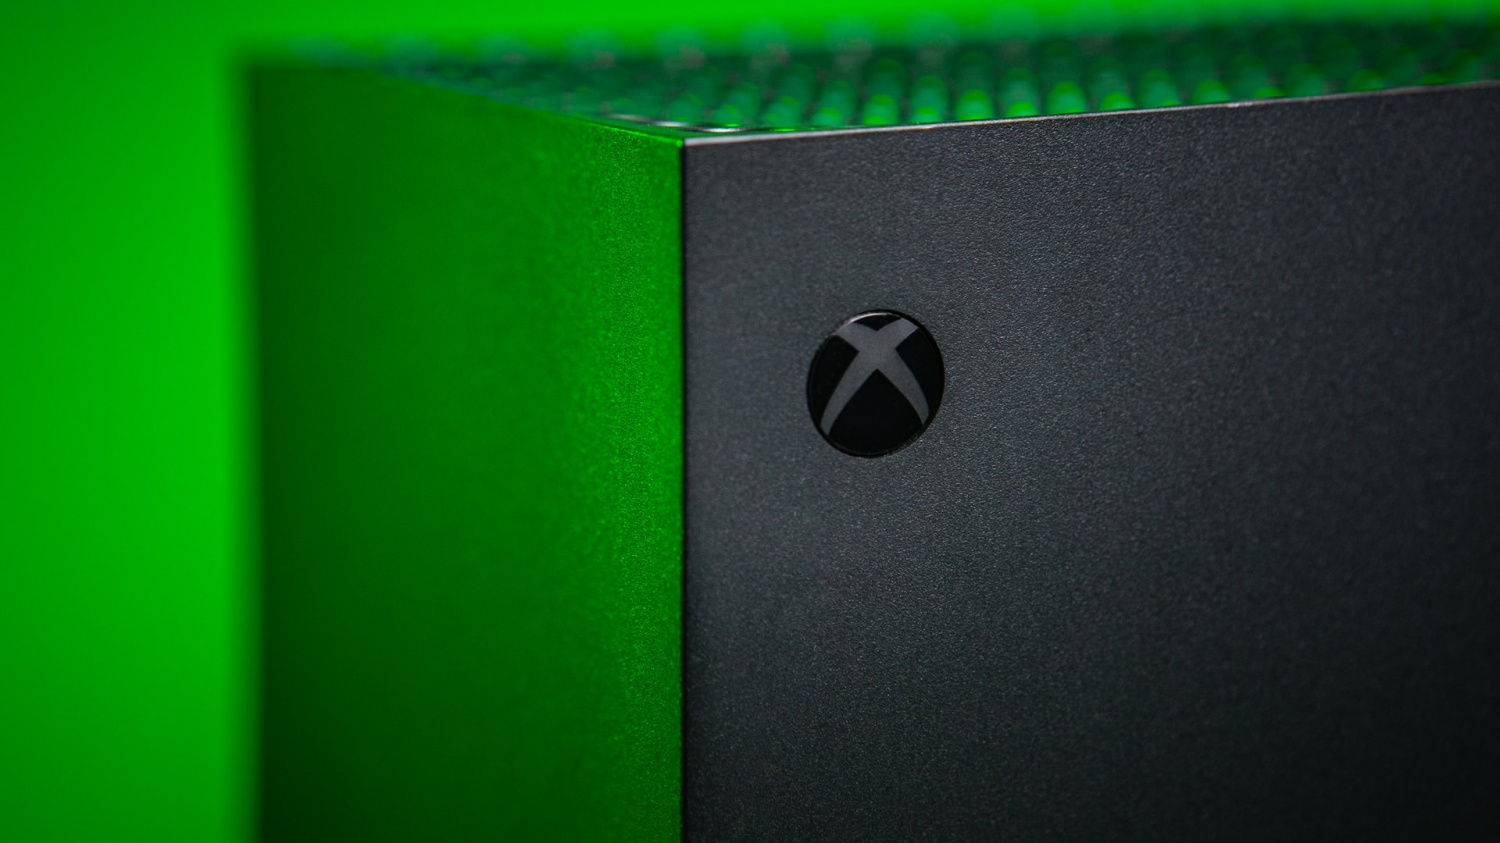 Xbox Series X Restock May 31-June 6: What Stores Could Drop Consoles This Week?